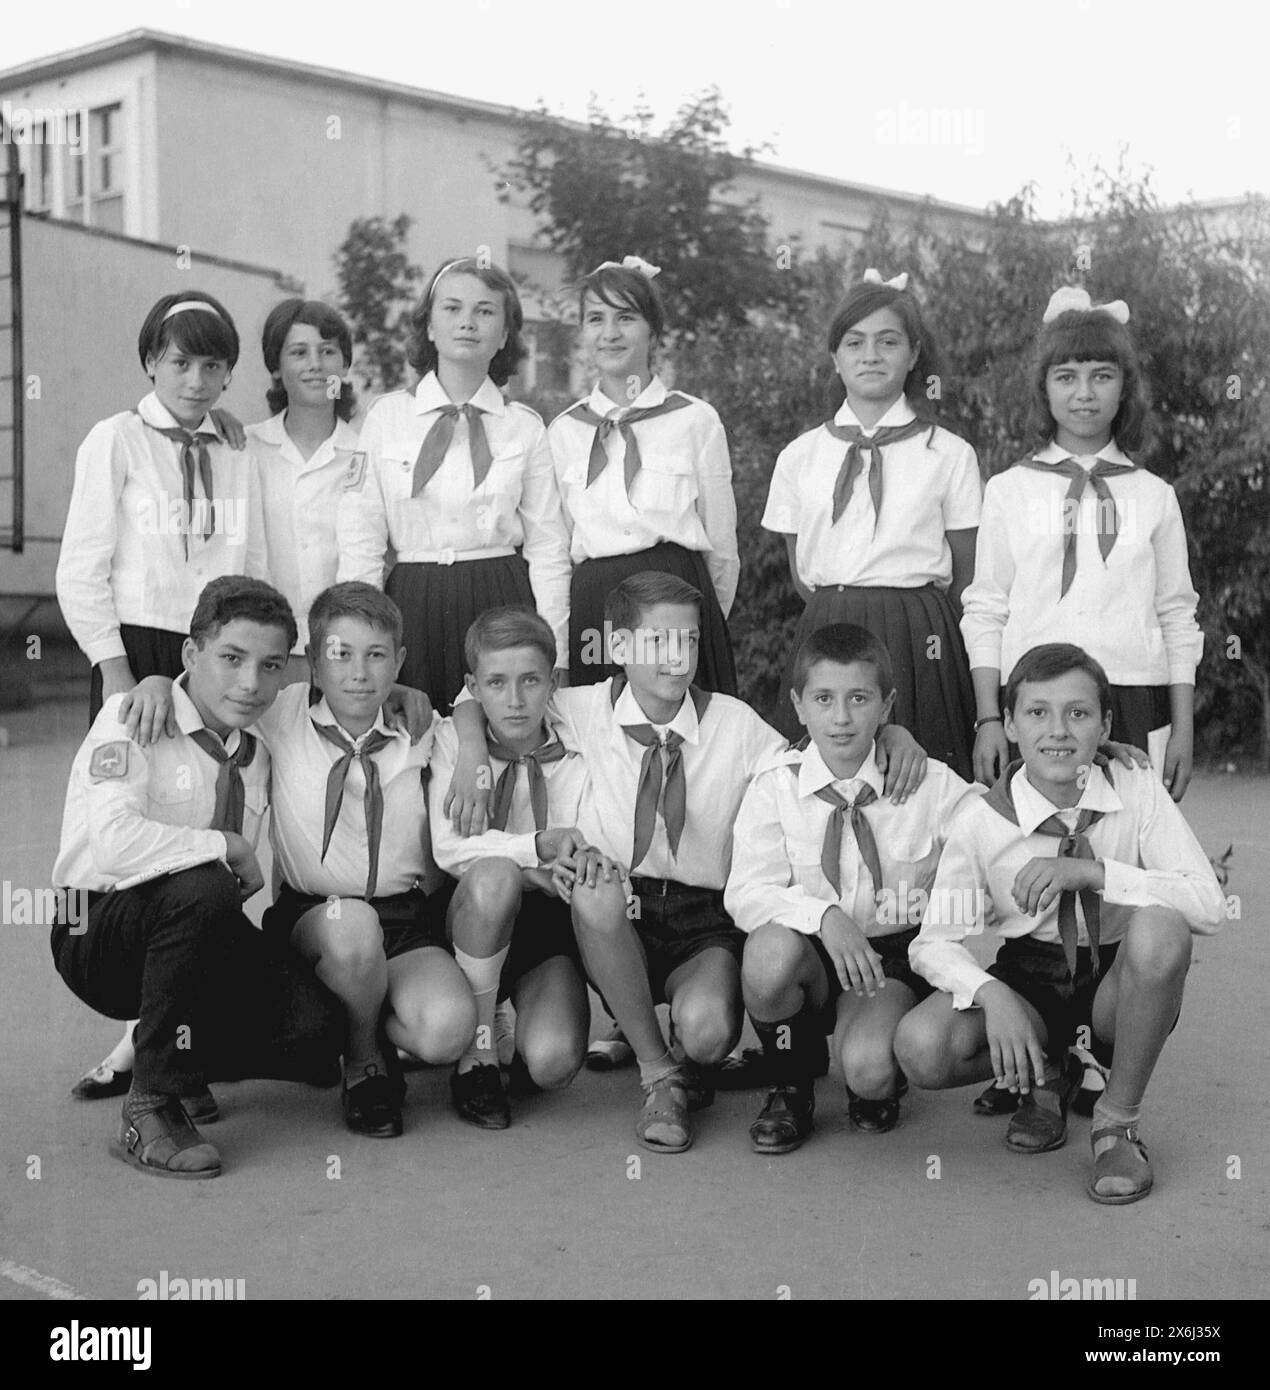 Group of middle schoolers wearing the standardized 'Pioneer' uniform in communist Romania in the 1970s Stock Photo